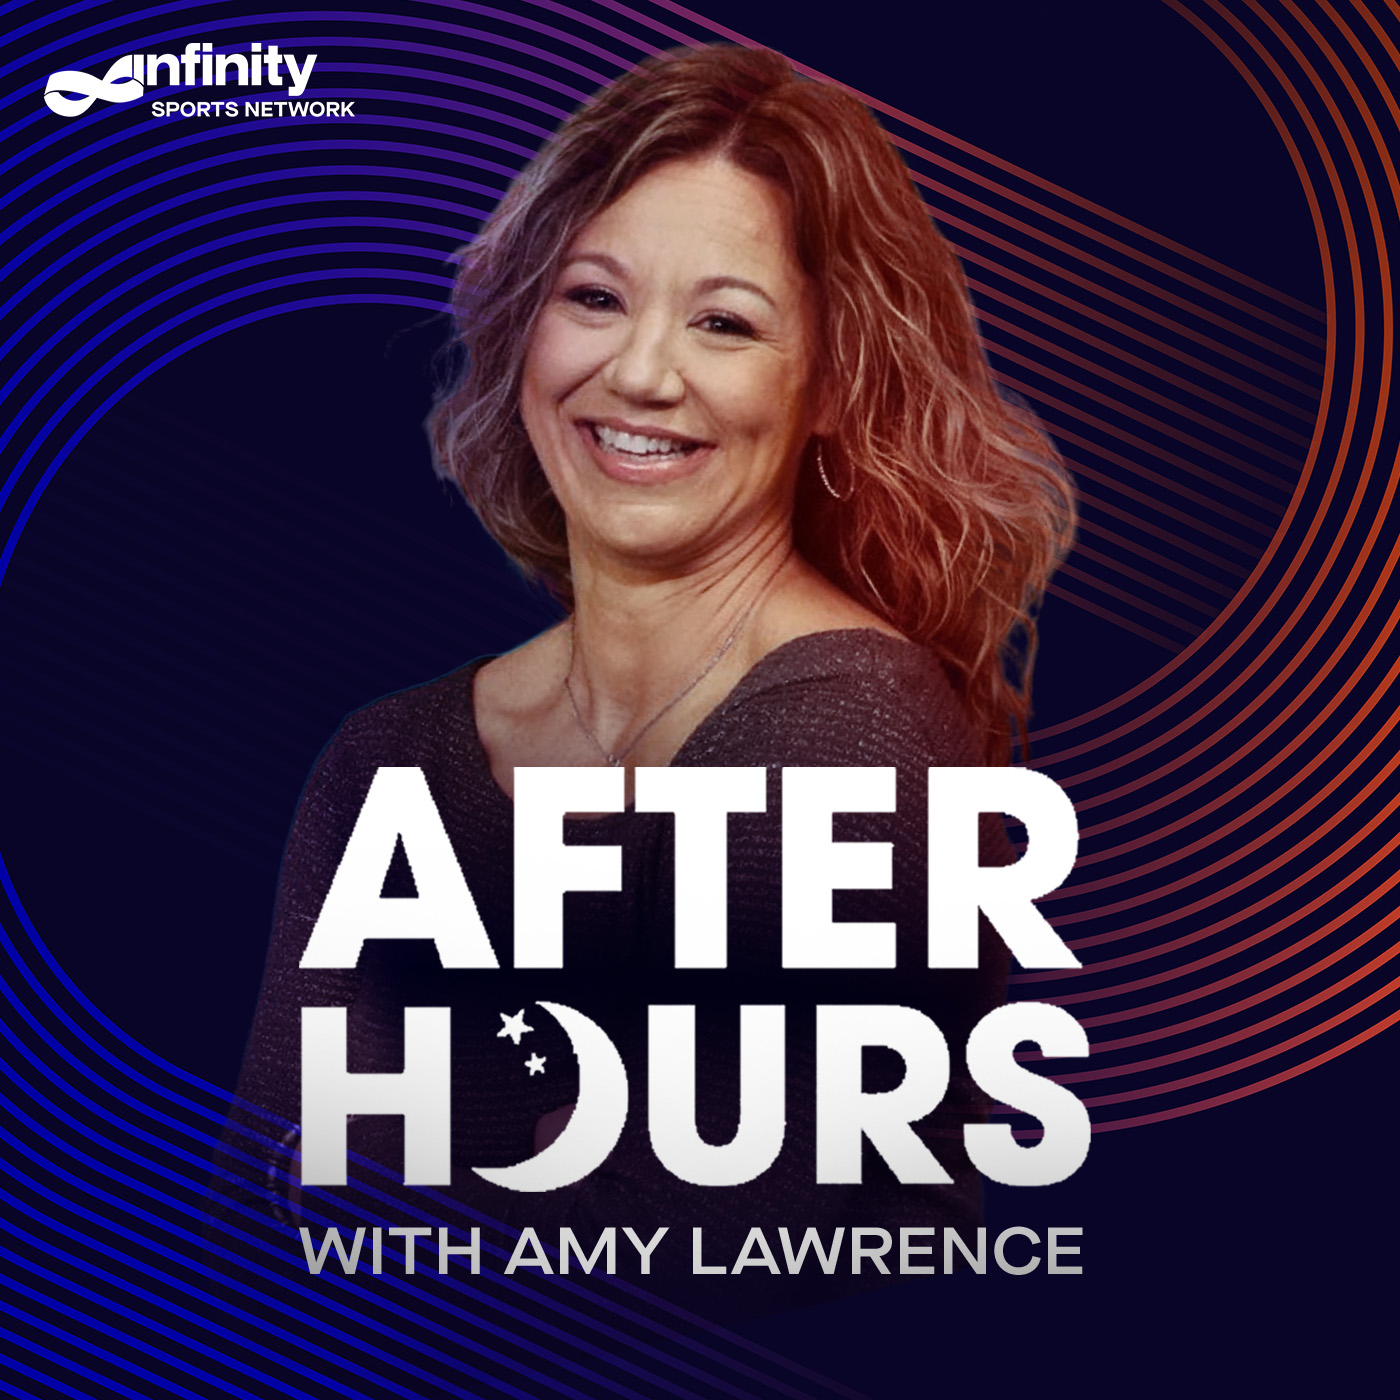 5/21/21 After Hours with Amy Lawrence PODCAST: Hour 4